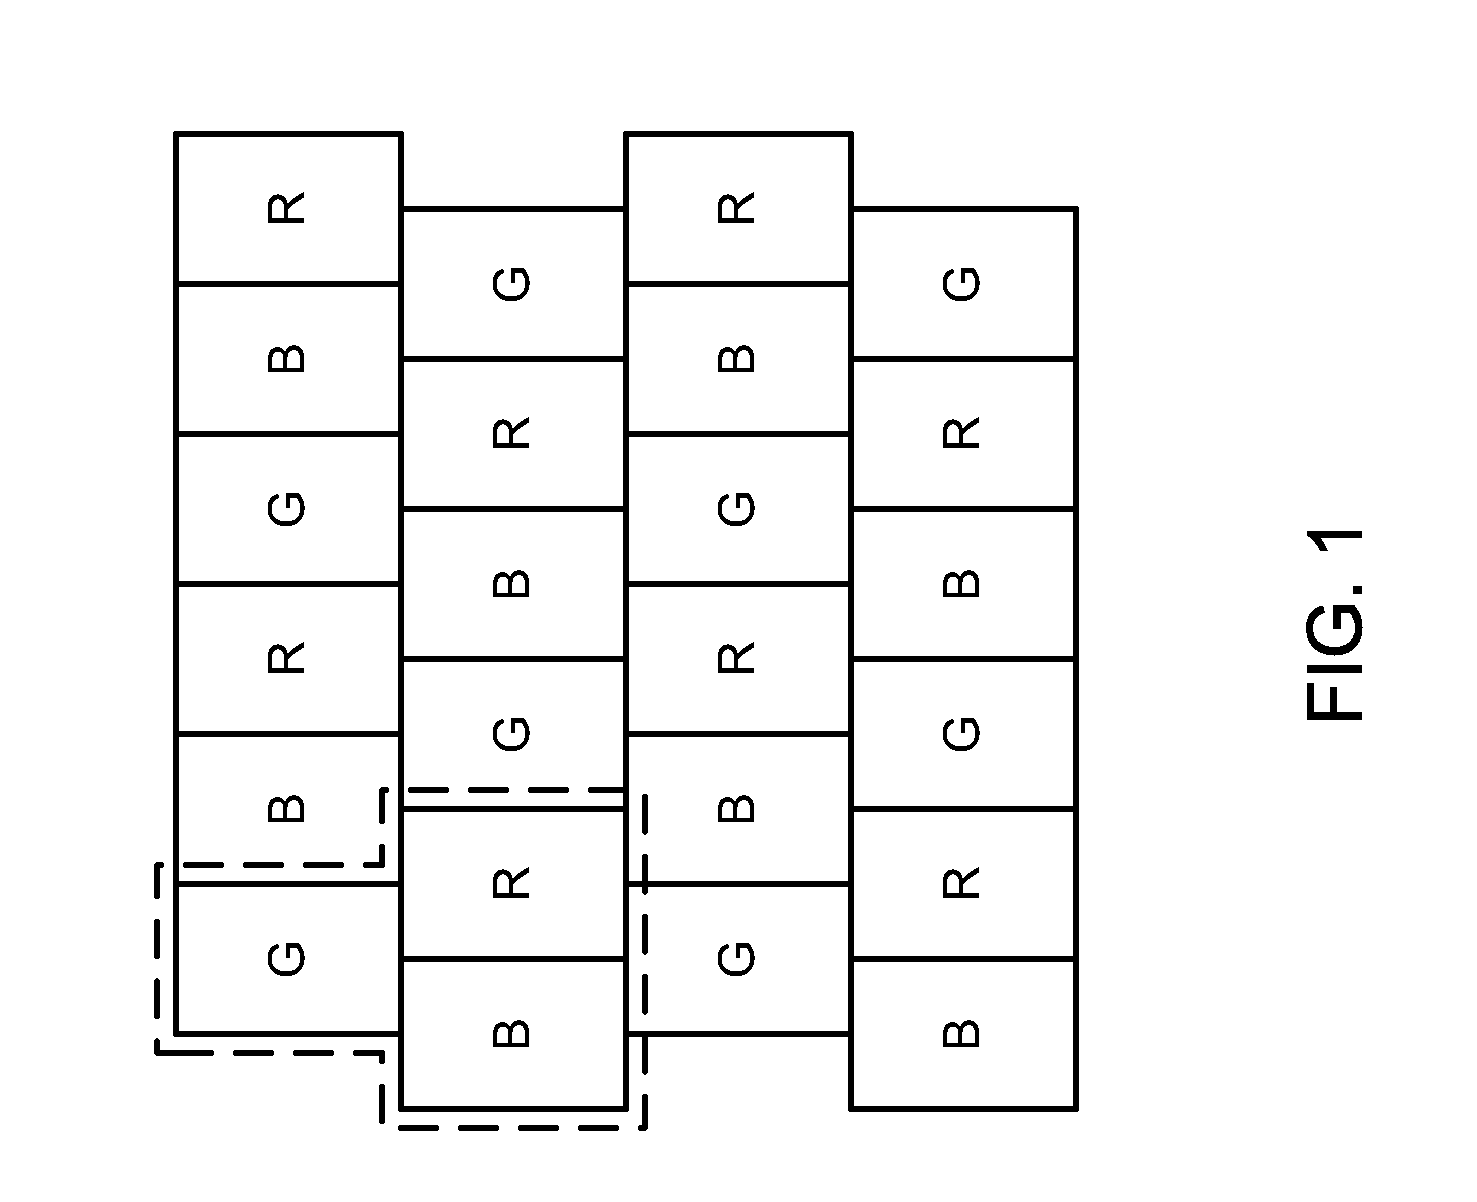 Method of sub-pixel rendering for a delta-triad structured display